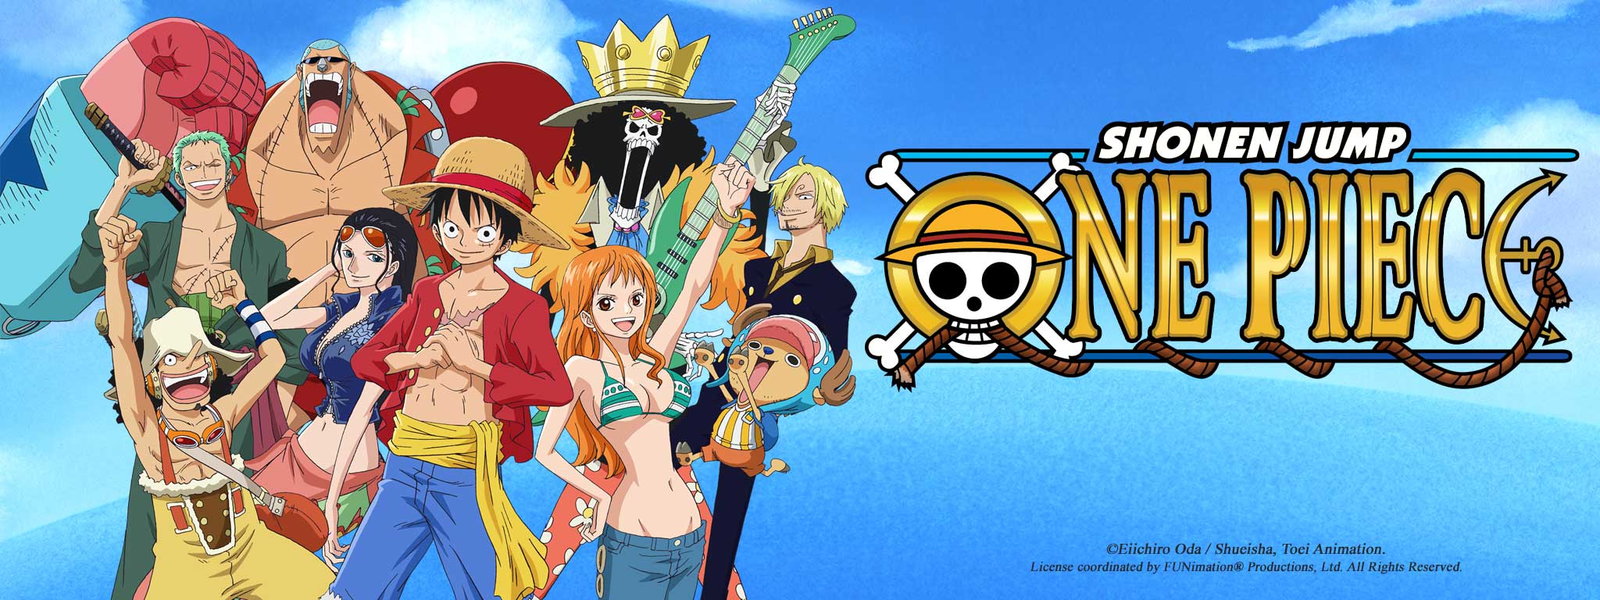 P**n parody of One Piece becomes popular on the Internet